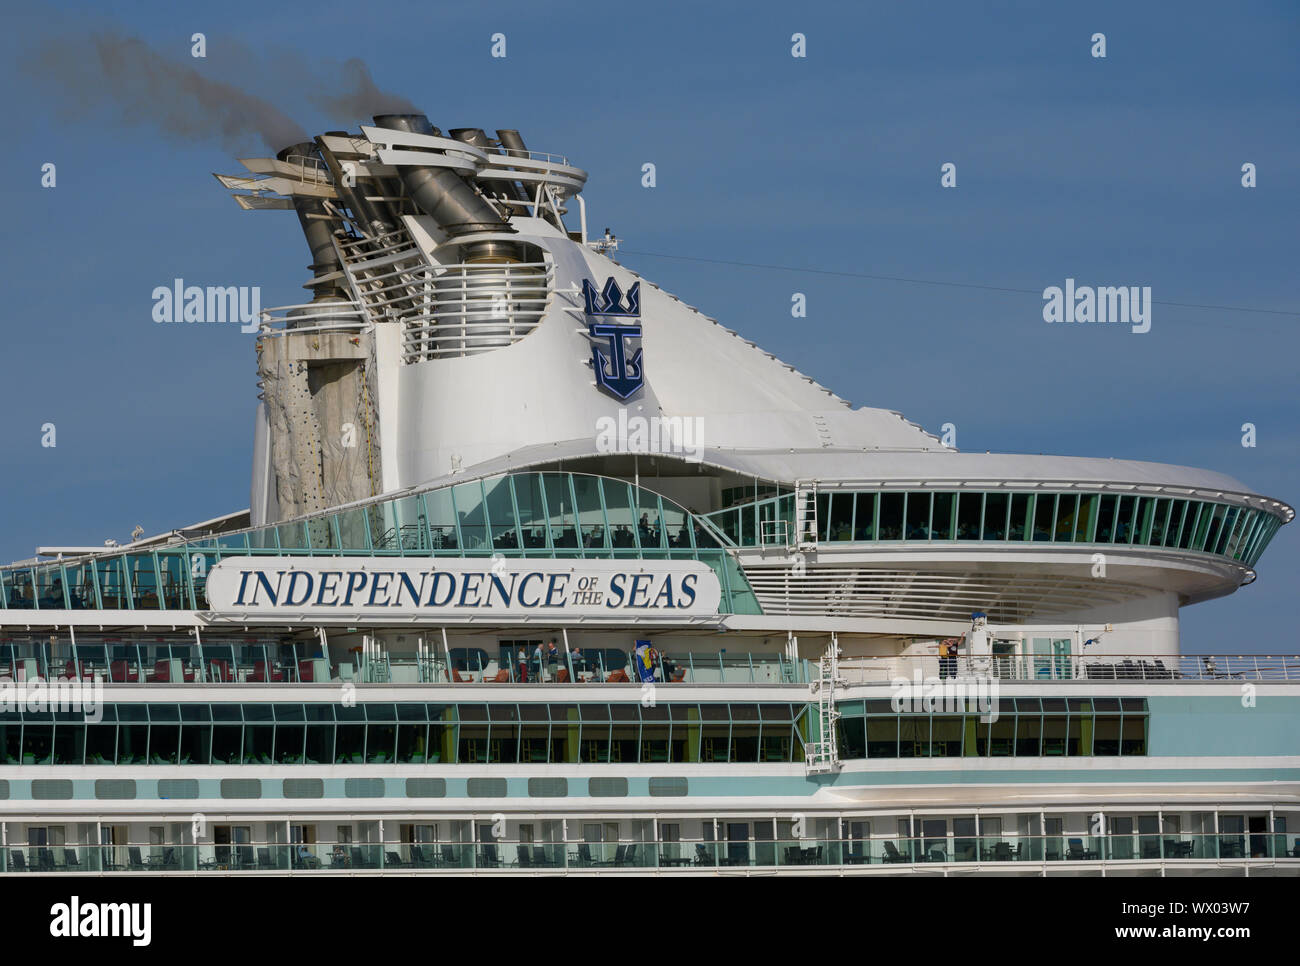 Independence of the Seas a Freedom-class cruise ship operated by The Royal Caribbean cruise line leaving Southampton, Hampshire, England, UK Stock Photo